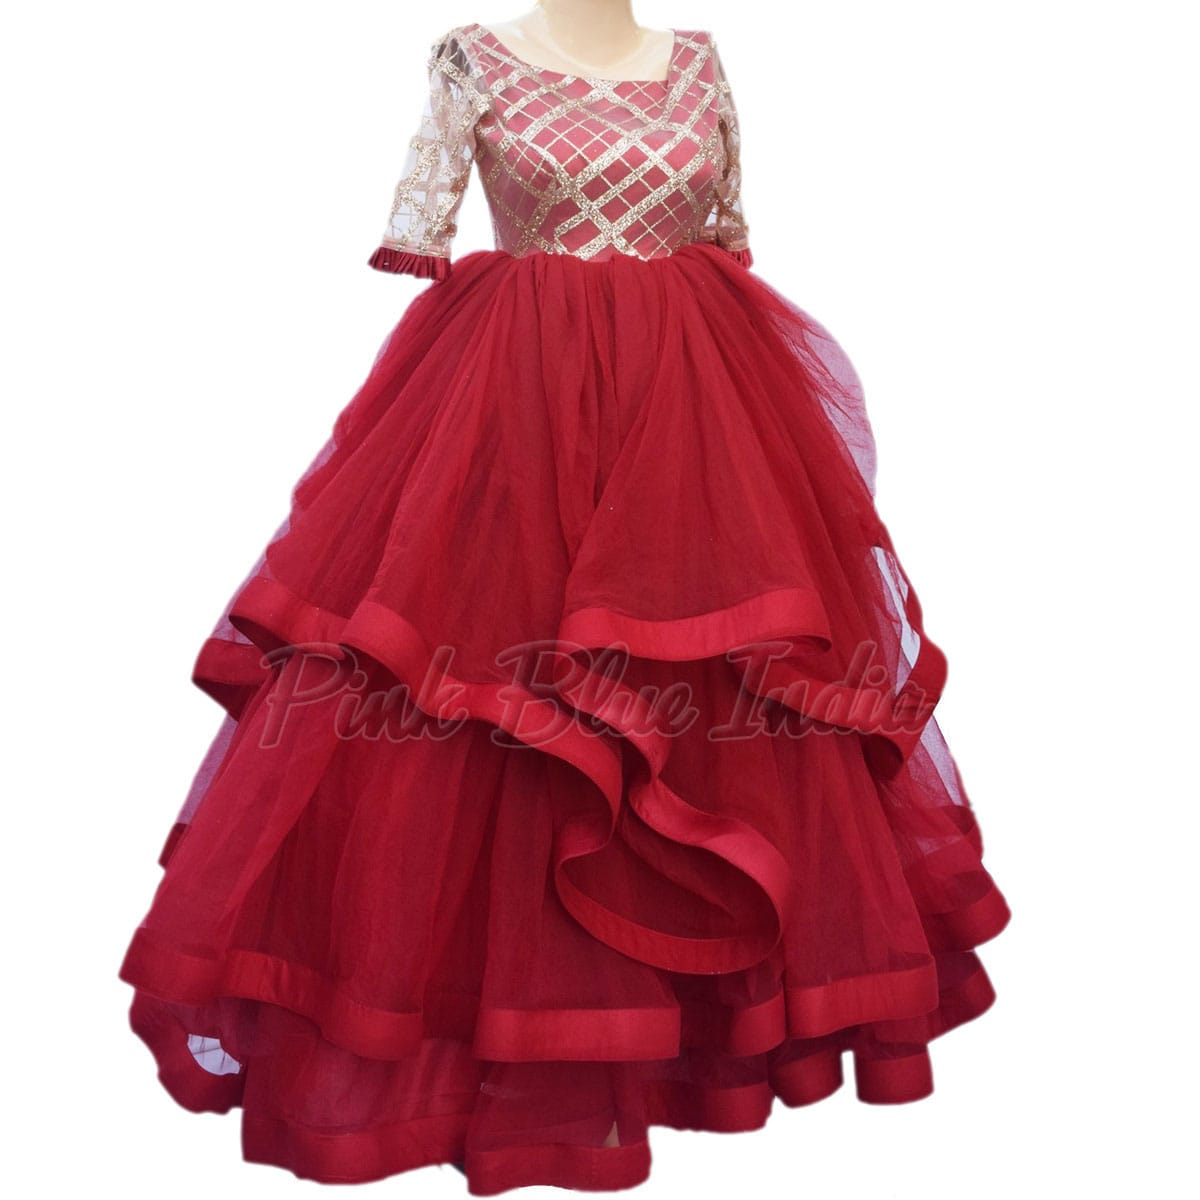 Red 1/2 Sleeve A-line Applique Princess Flower Girl Dress Party Long Gowns  | eBay